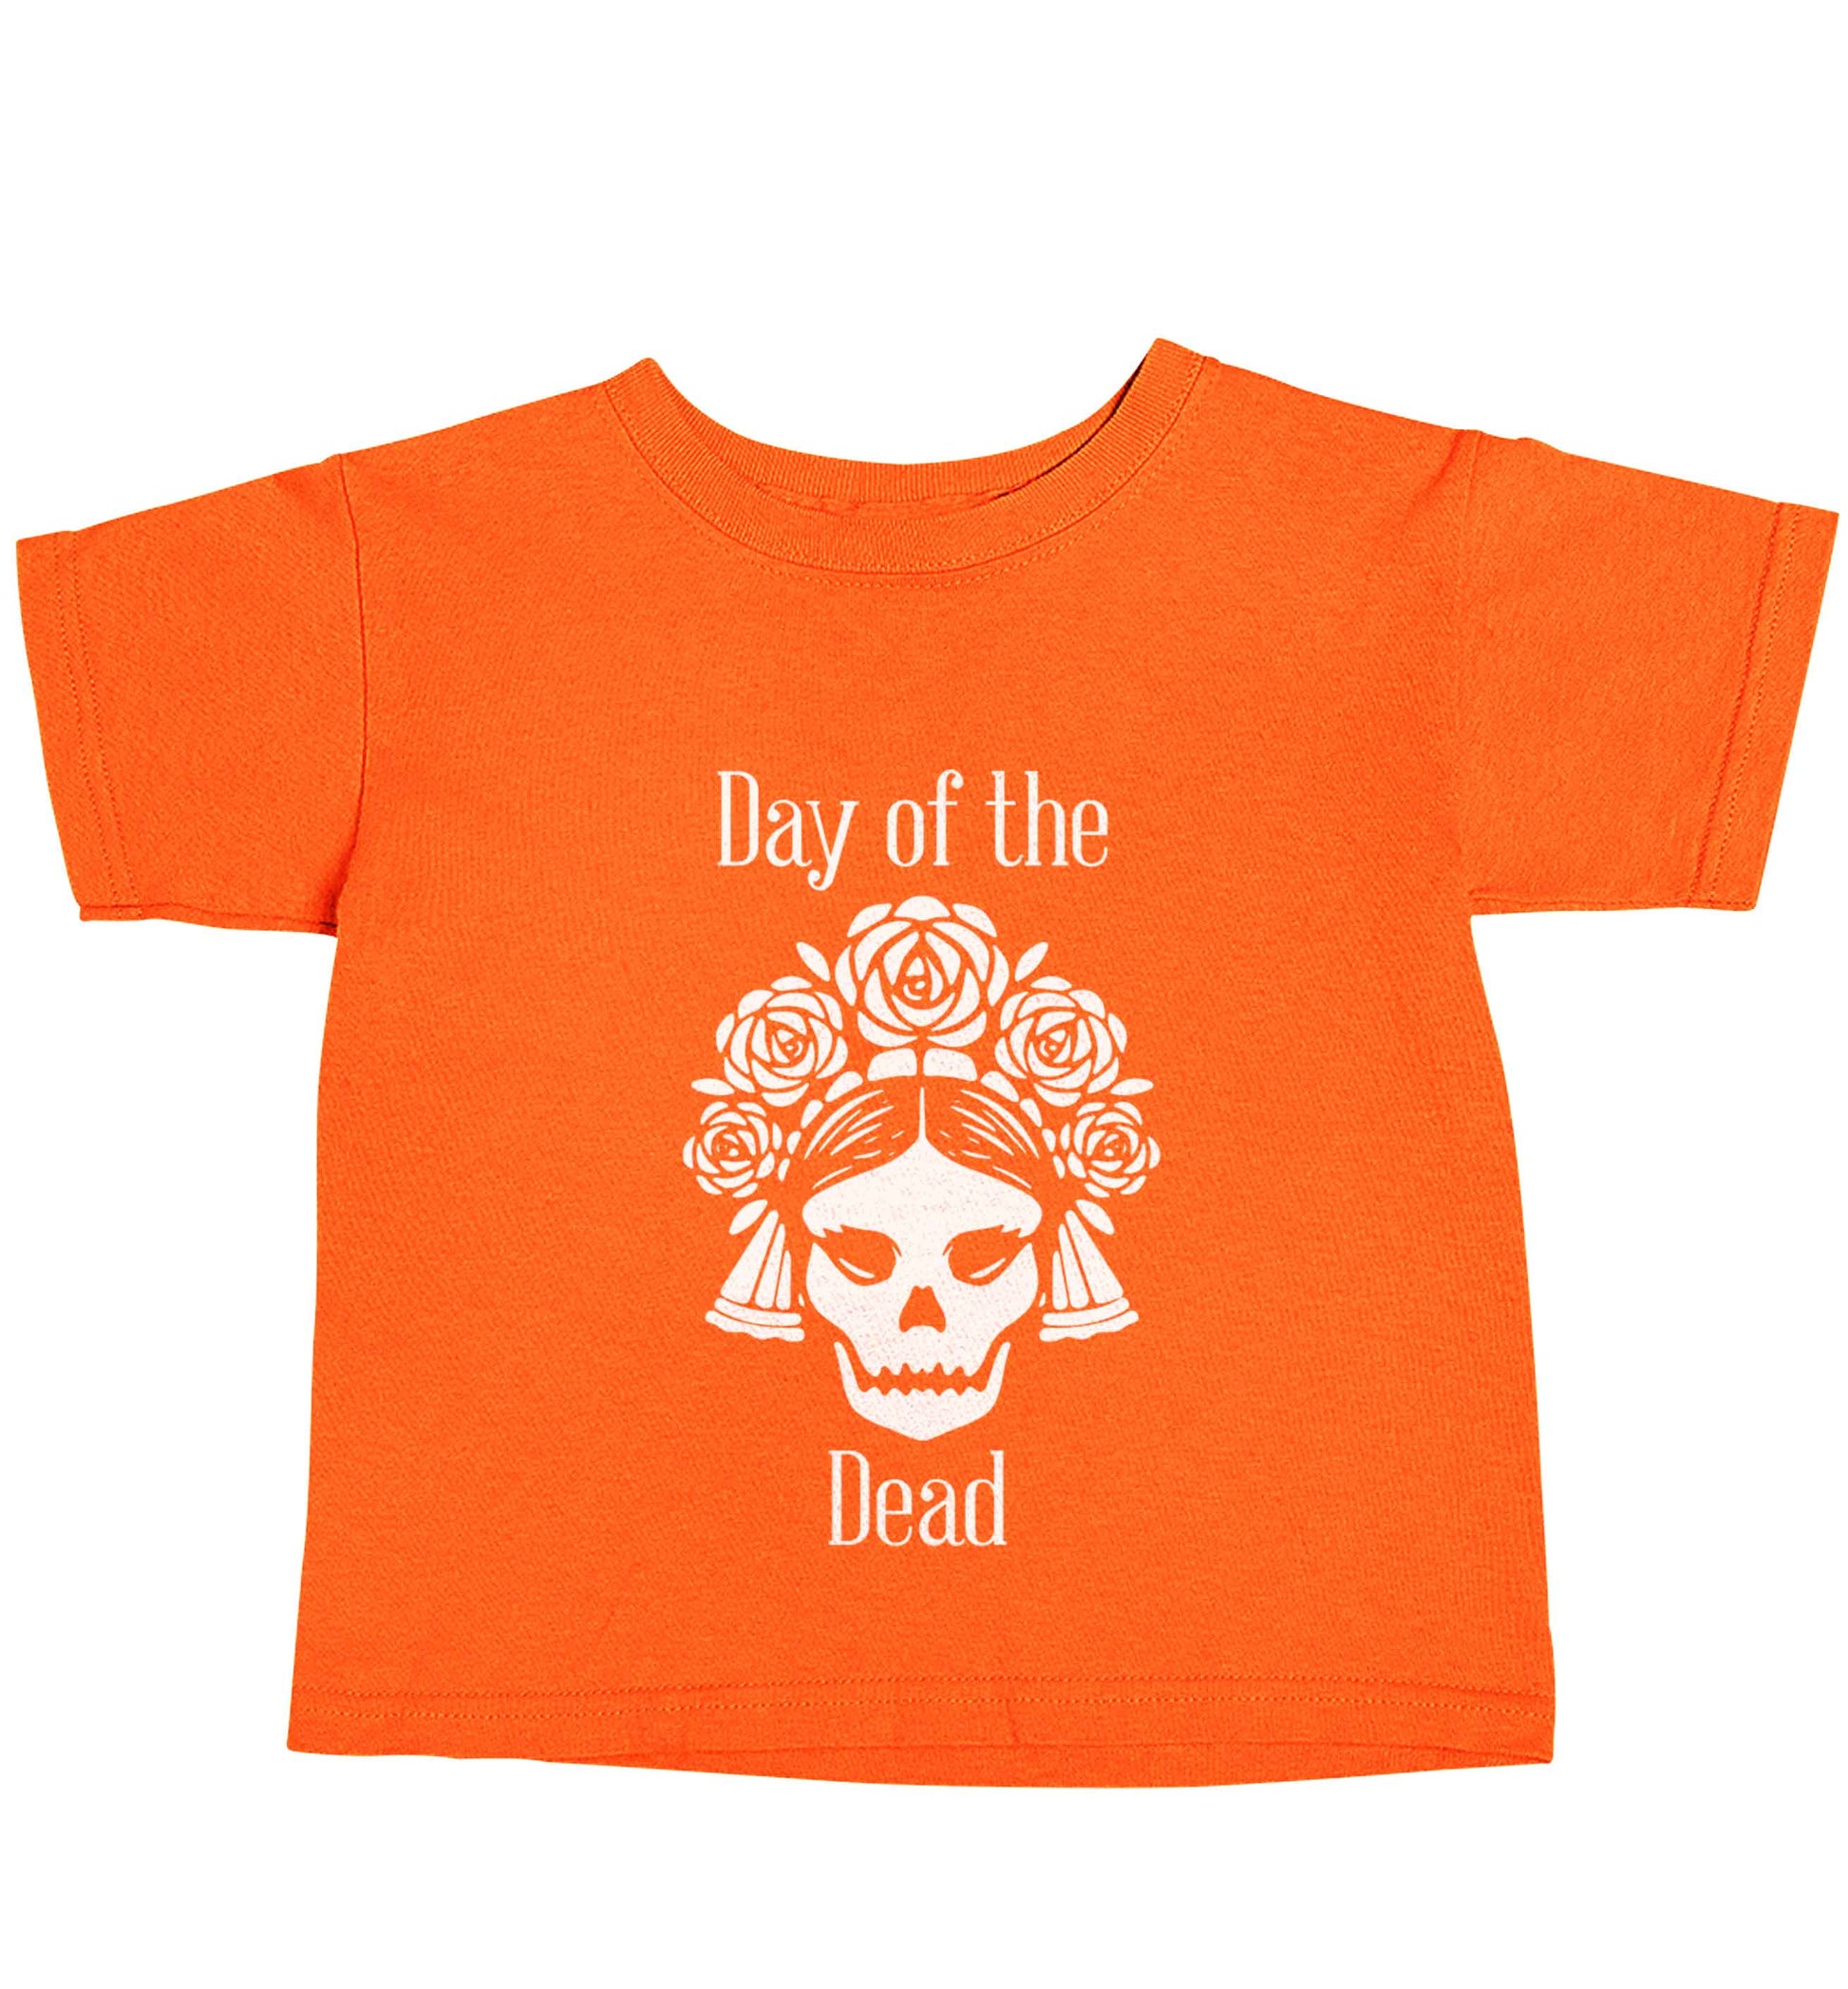 Day of the dead orange baby toddler Tshirt 2 Years